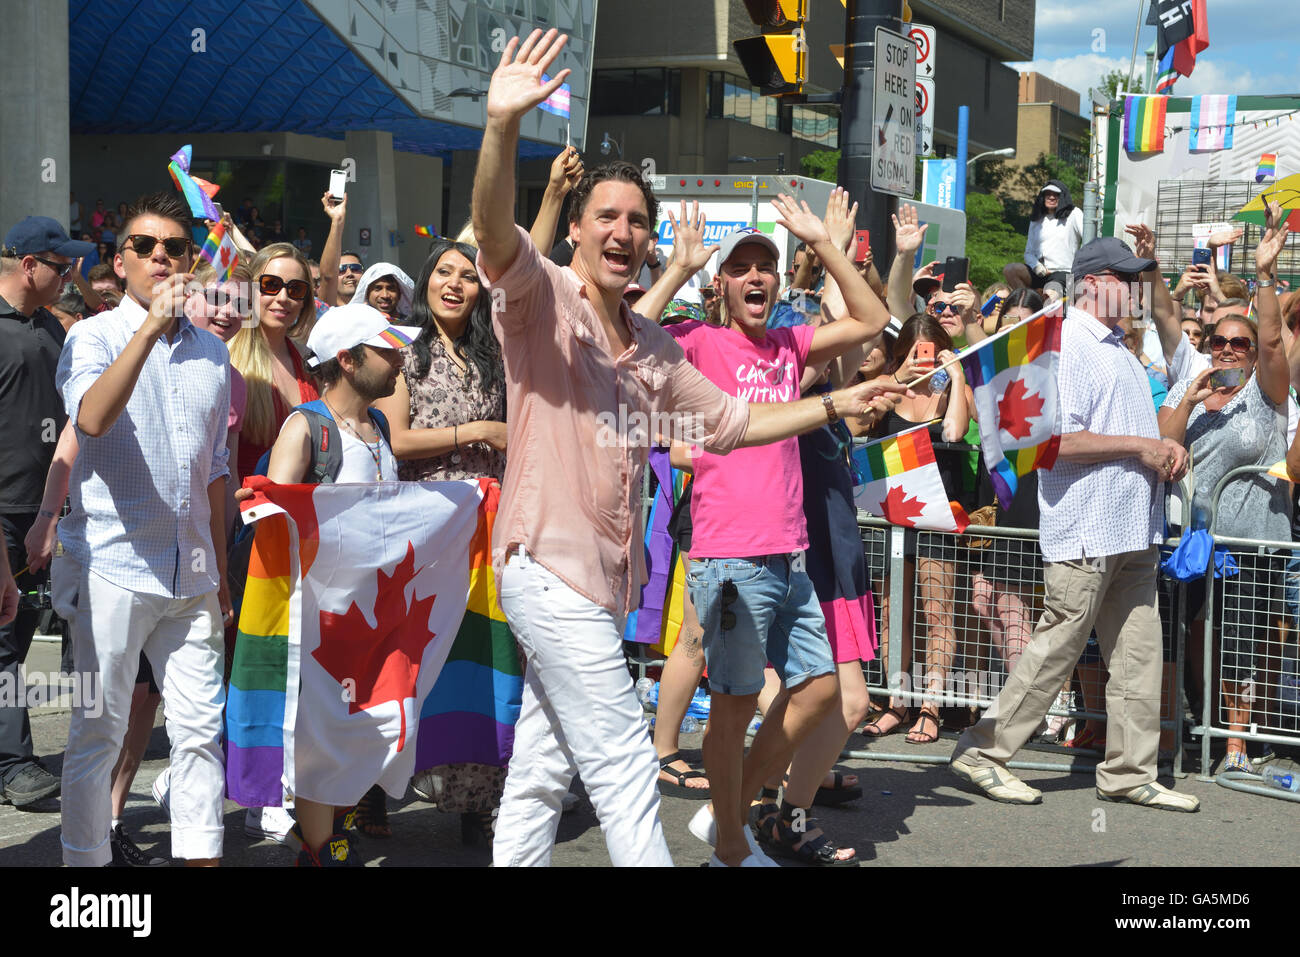 Another first for Canadian Prime Minister Justin Trudeau, marching at The Toronto Gay Pride Parade on Sunday July, 3, 2016, he was joined by about one million other Canadians who came downtown to celebrate. Credit:  Gregory Holmgren/Alamy Live News Stock Photo